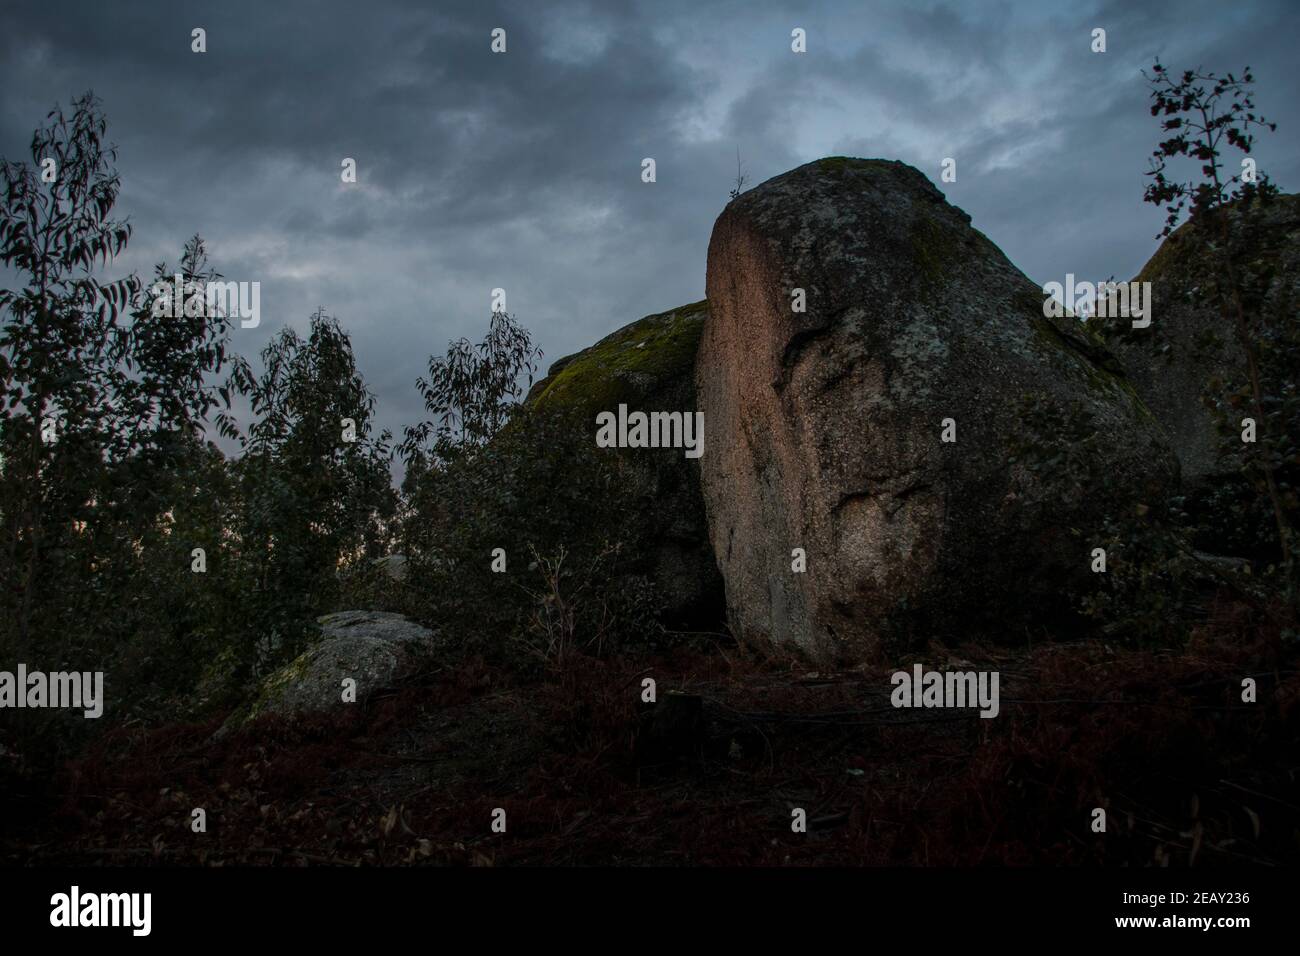 Place with a lot of big stones covered in moss in a stormy environment and grey day at sunset Stock Photo